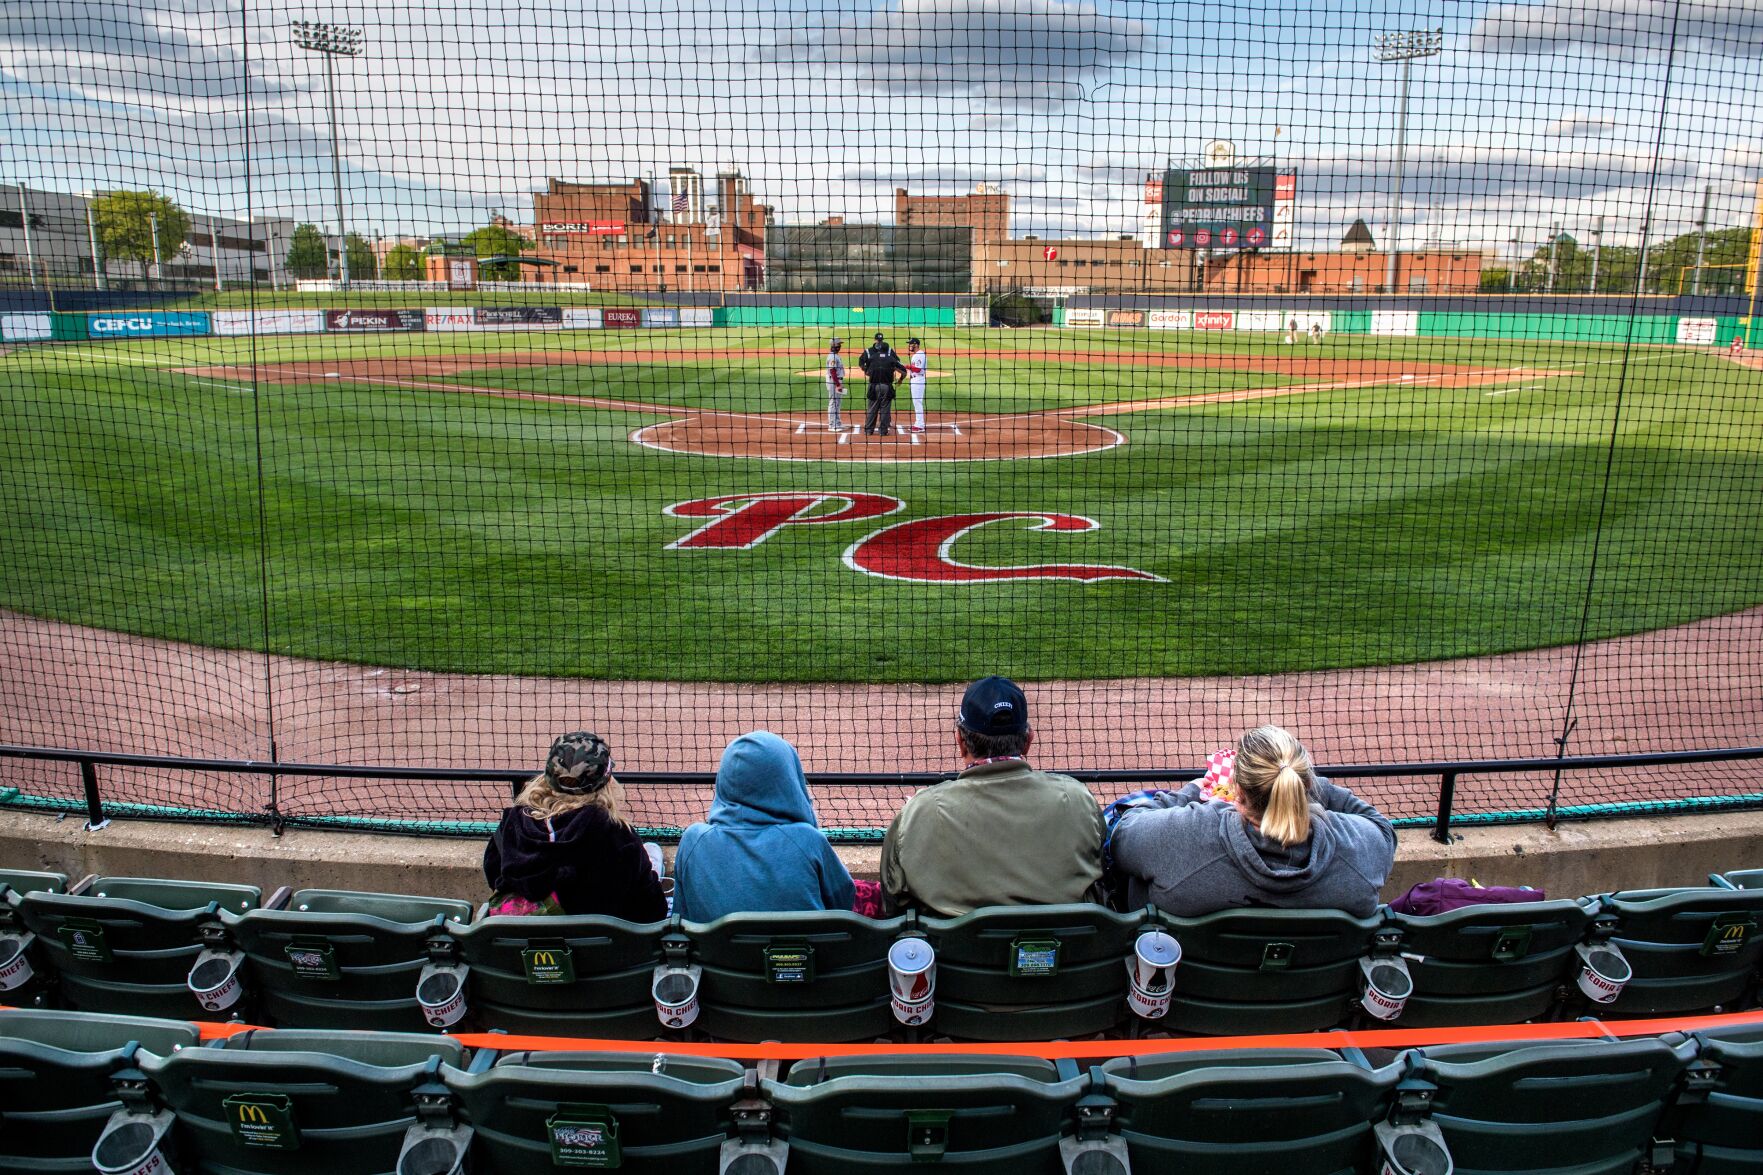 Fans push Cardinals minor league team in Peoria to add netting and stop foul-ball injuries